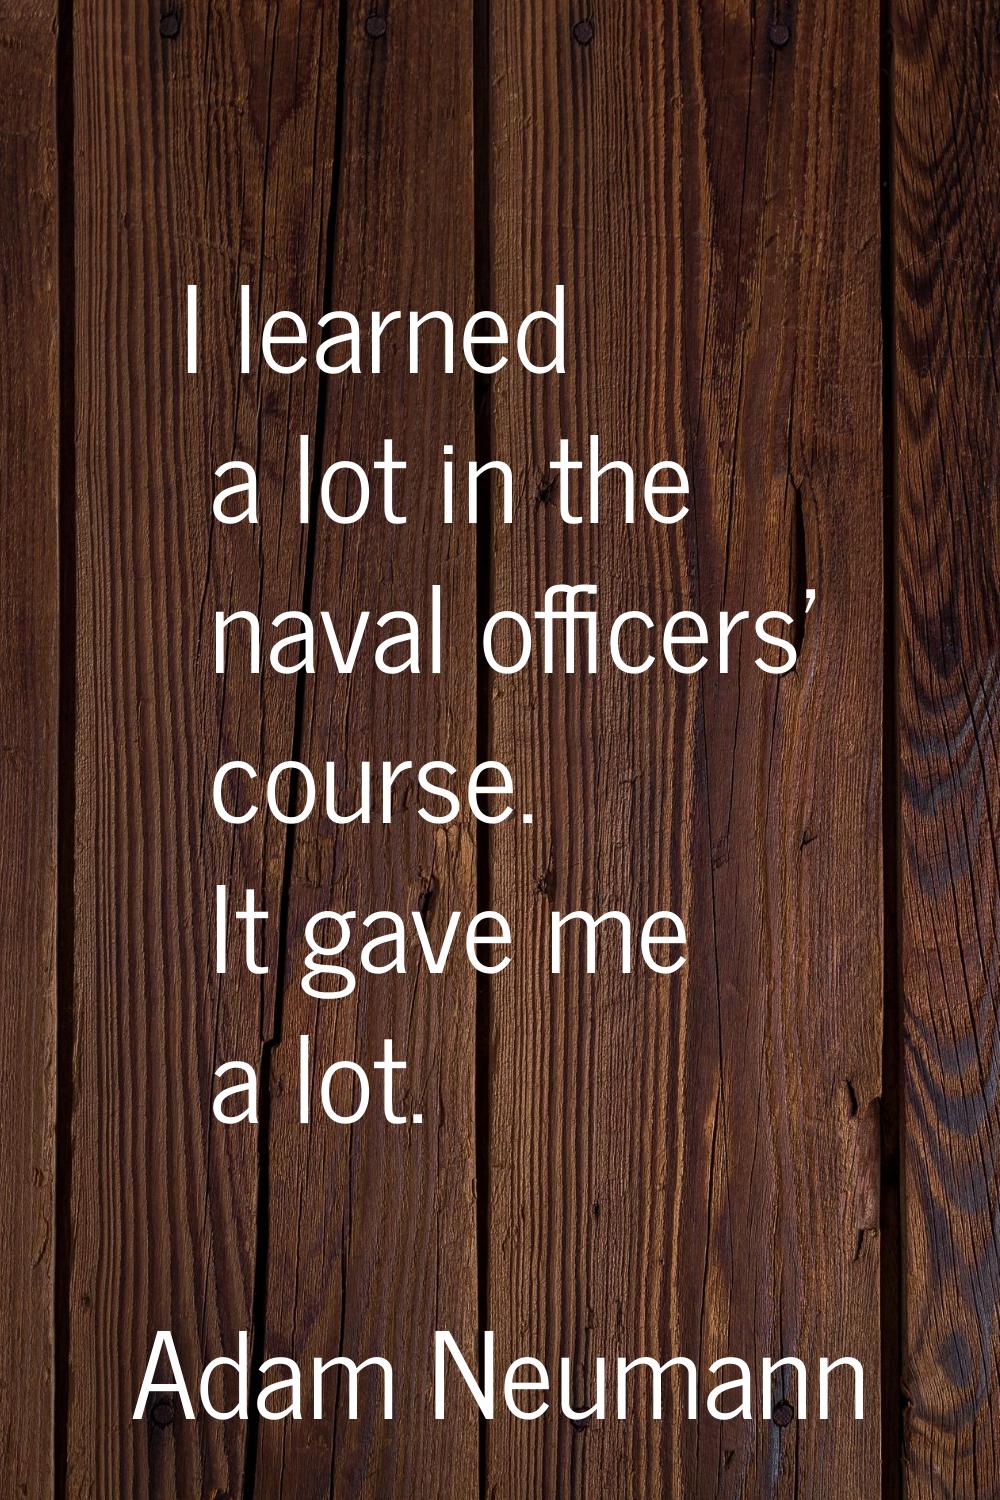 I learned a lot in the naval officers' course. It gave me a lot.